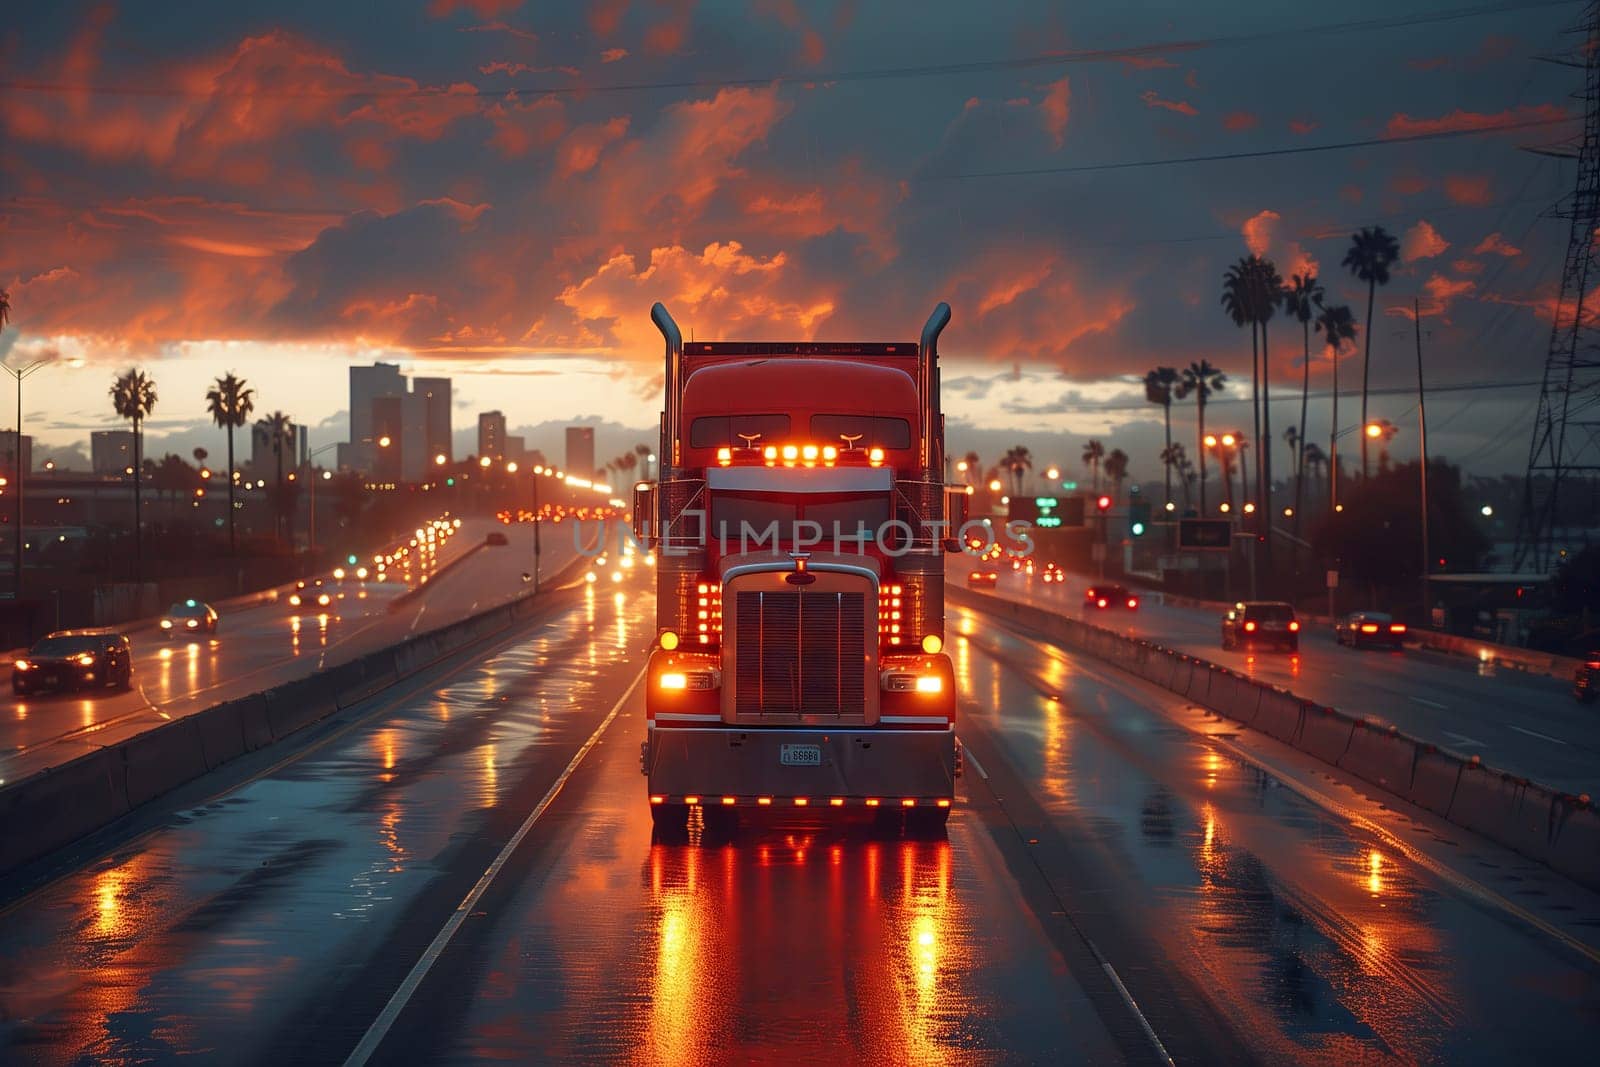 Semi truck cruising down highway at night under cloudy sky by richwolf